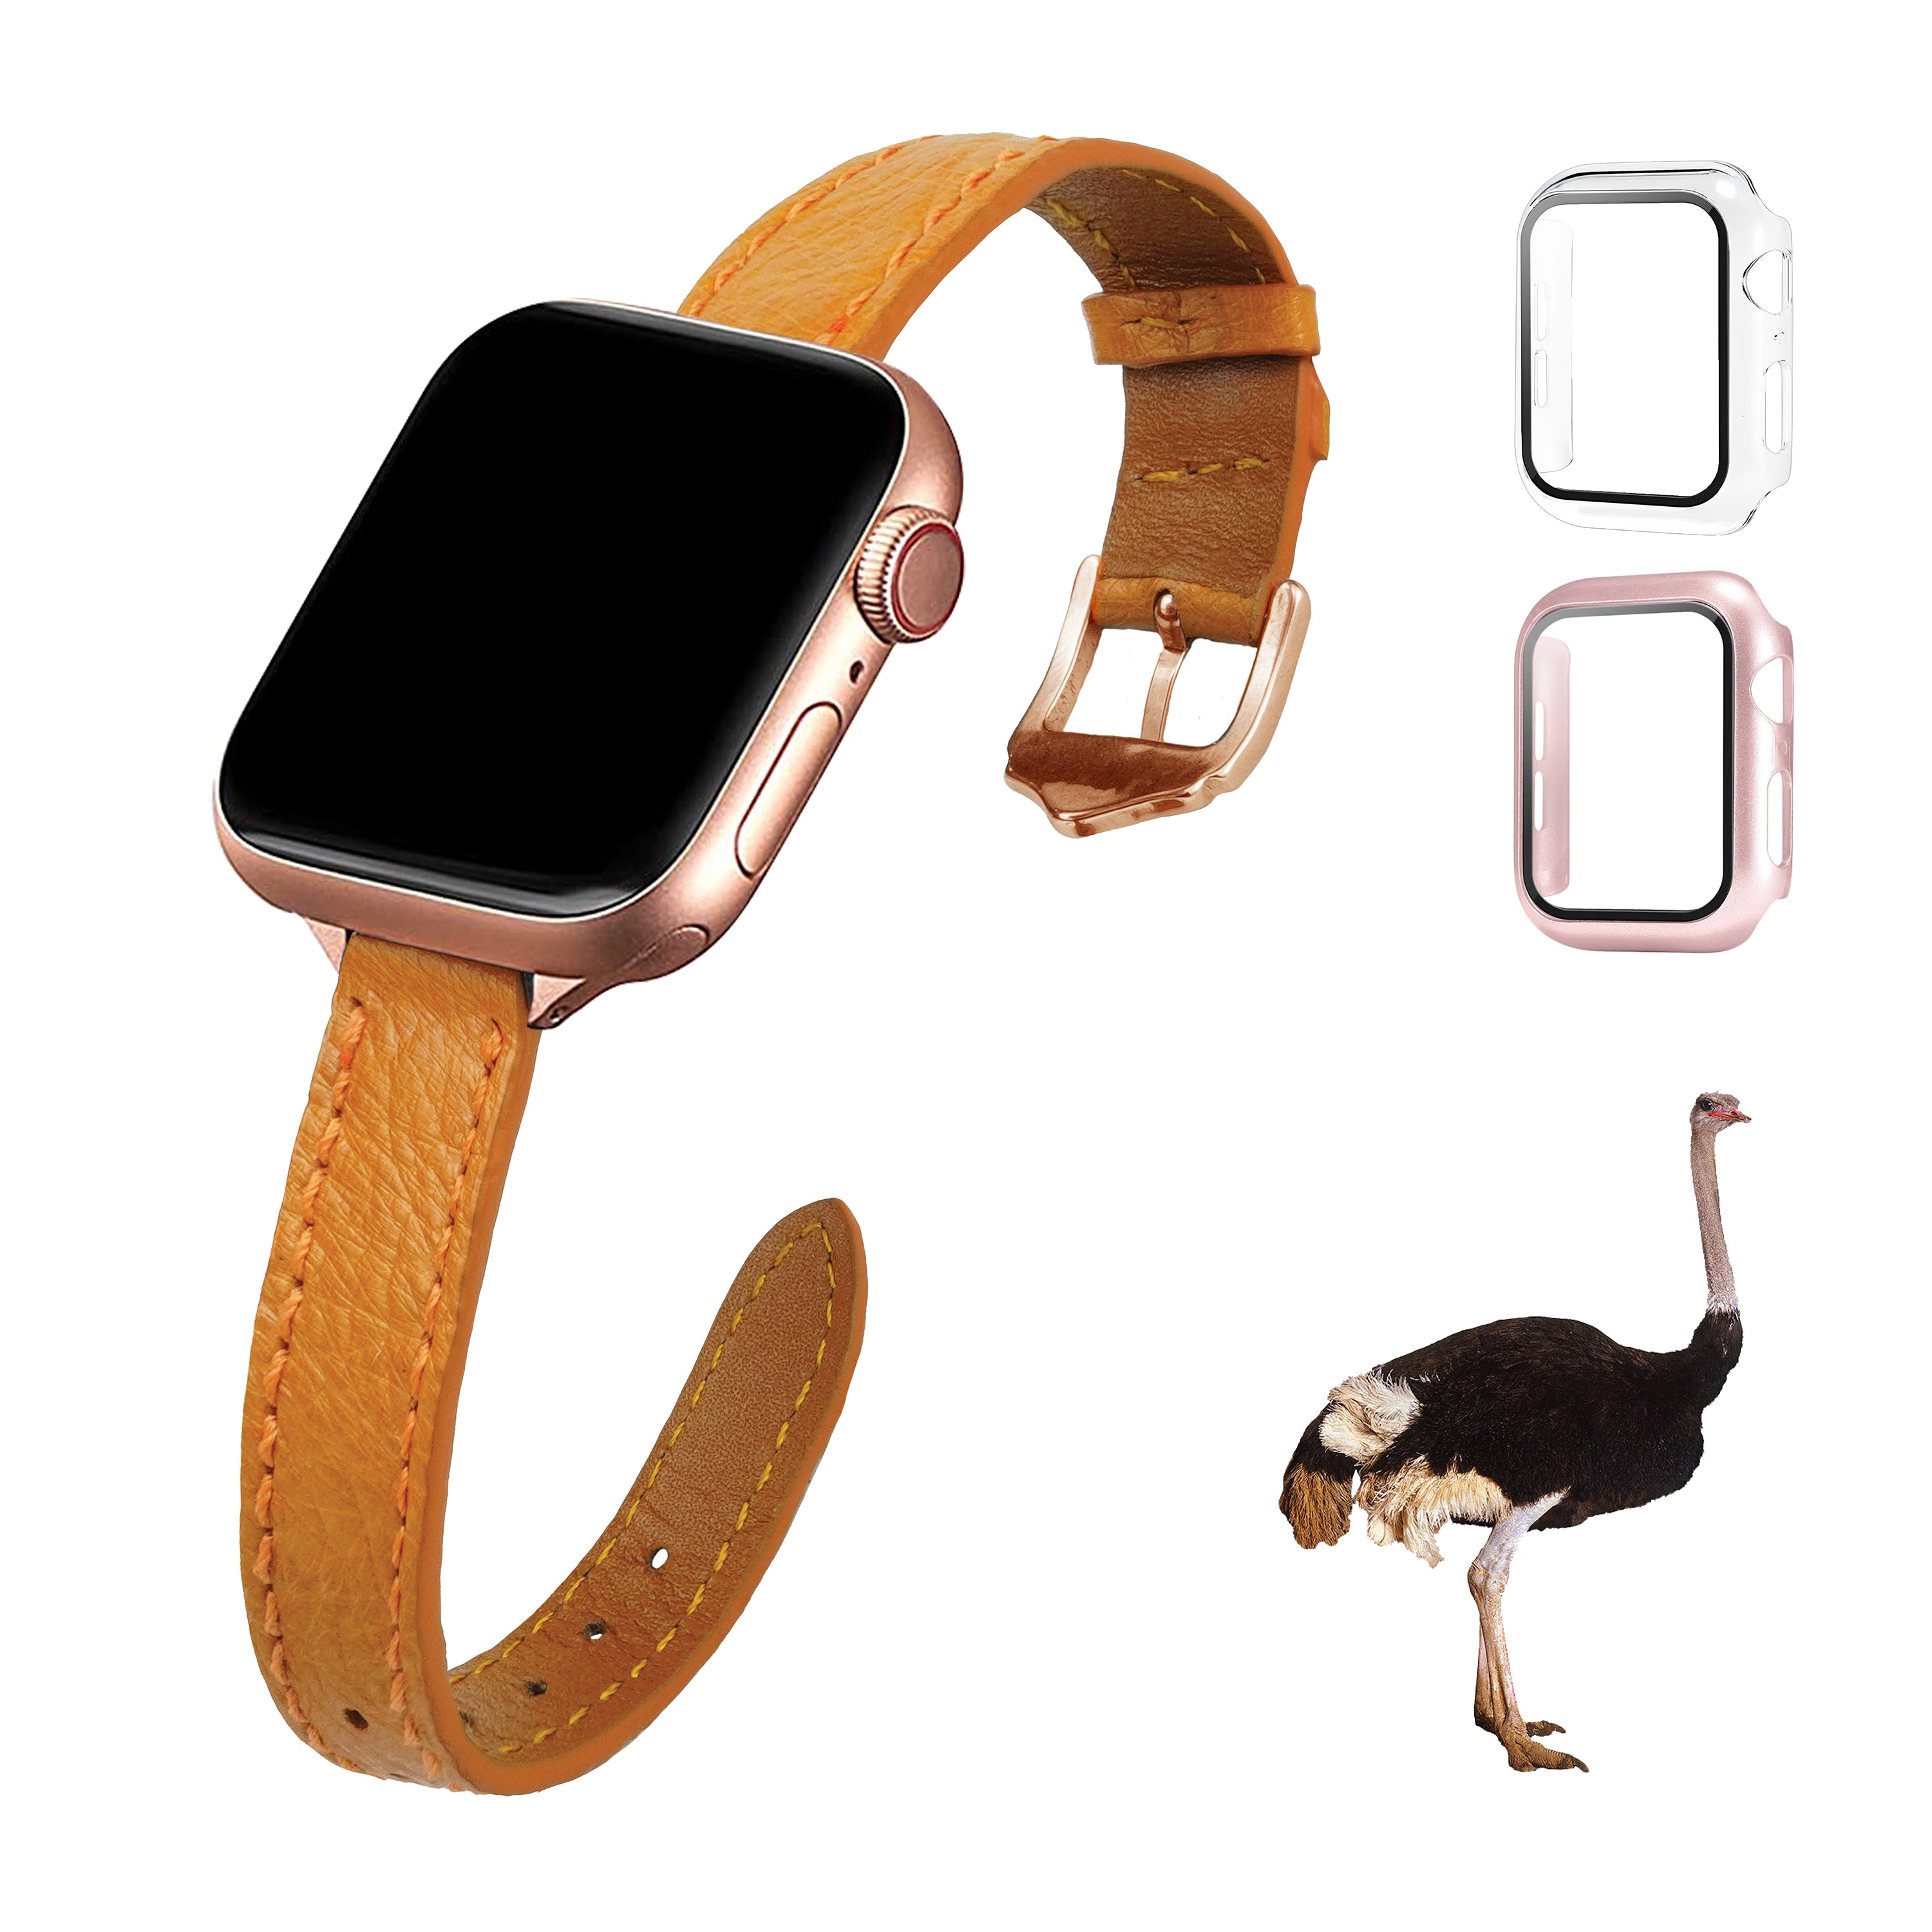 Tan Flat Ostrich Leather Band Compatible Apple Watch Iwatch 42mm Screen Protector Case Gold Adapter Replacement Strap For Smartwatch Series 1 2 3 Leather Handmade AW-182G-W-42MM